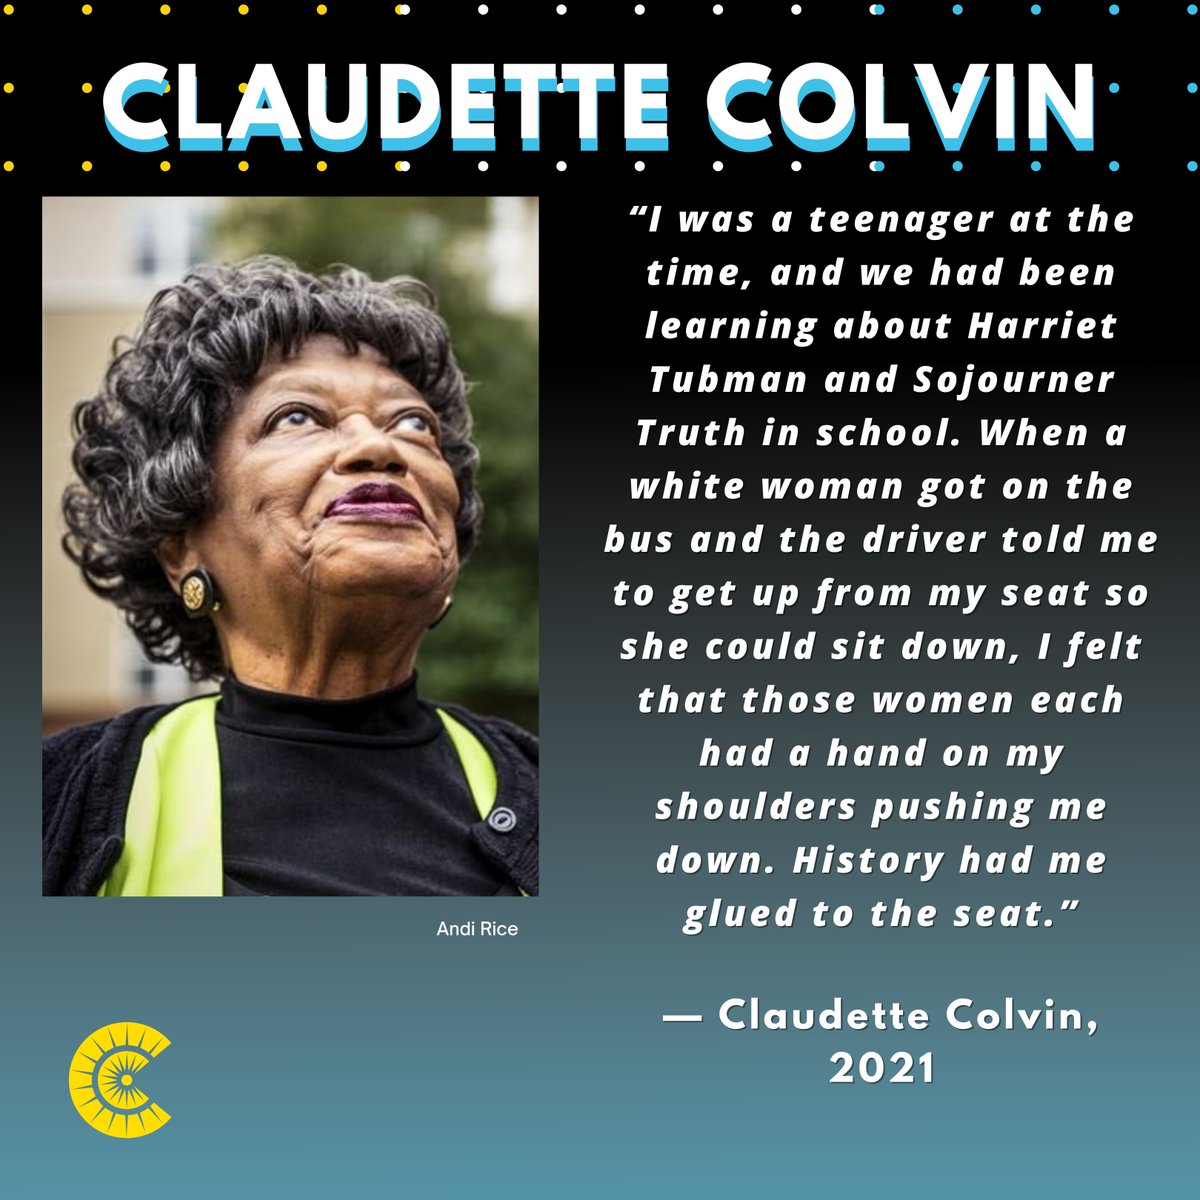 Last week, @KeishaBlain shared a couple of unsung Black female activists that deserve more recognition. Claudette Colvin was just 15 years old when she refused to give up her bus seat to a white woman in Montgomery, AL.

#ClaudetteColvin
#CreatingCitizens
#HERstory